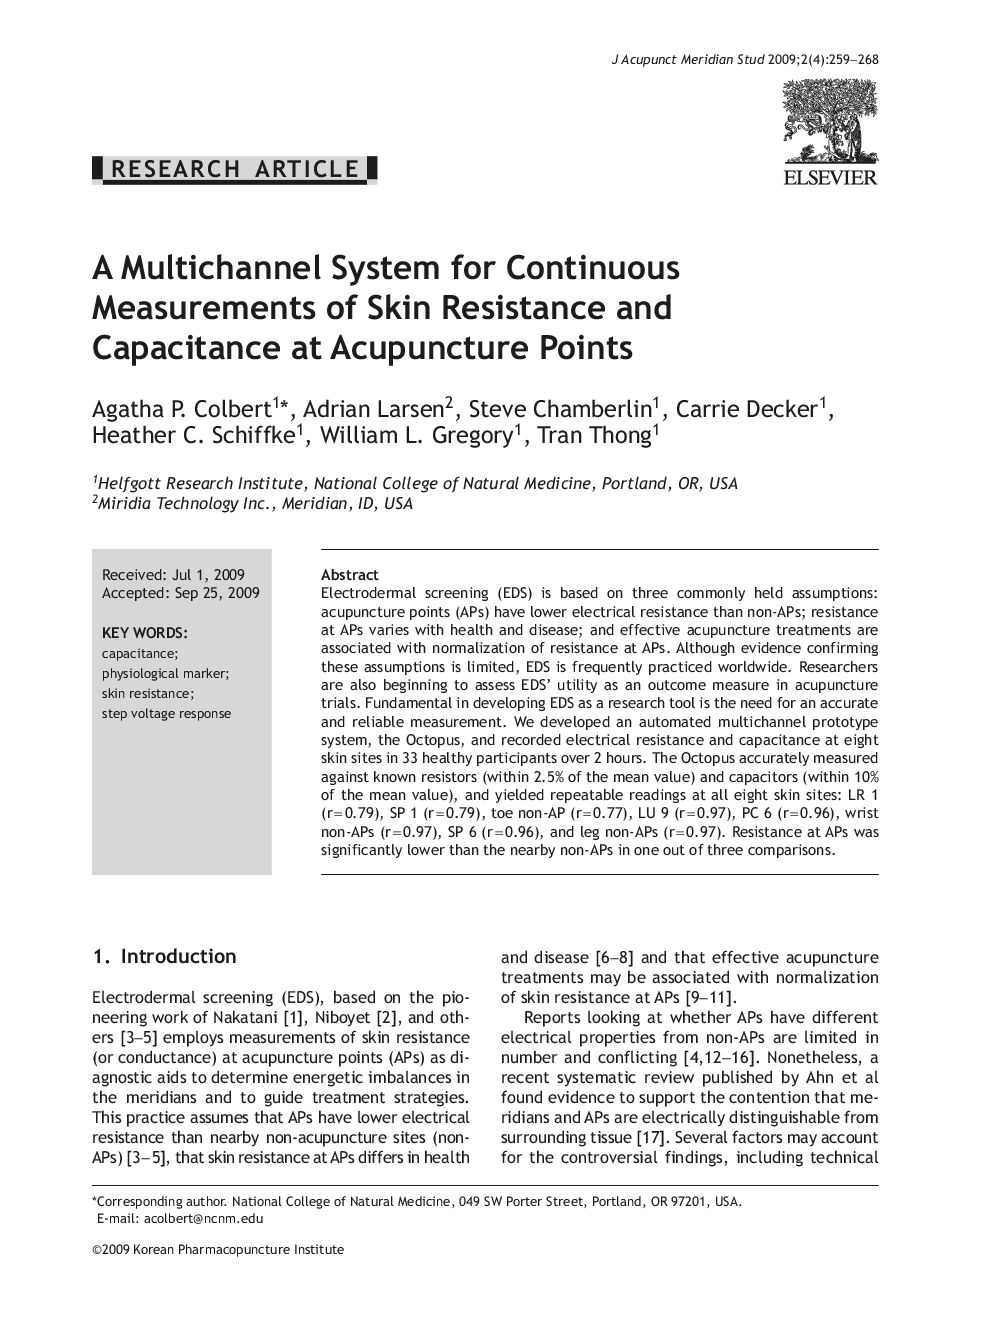 A Multichannel System for Continuous Measurements of Skin Resistance and Capacitance at Acupuncture Points 